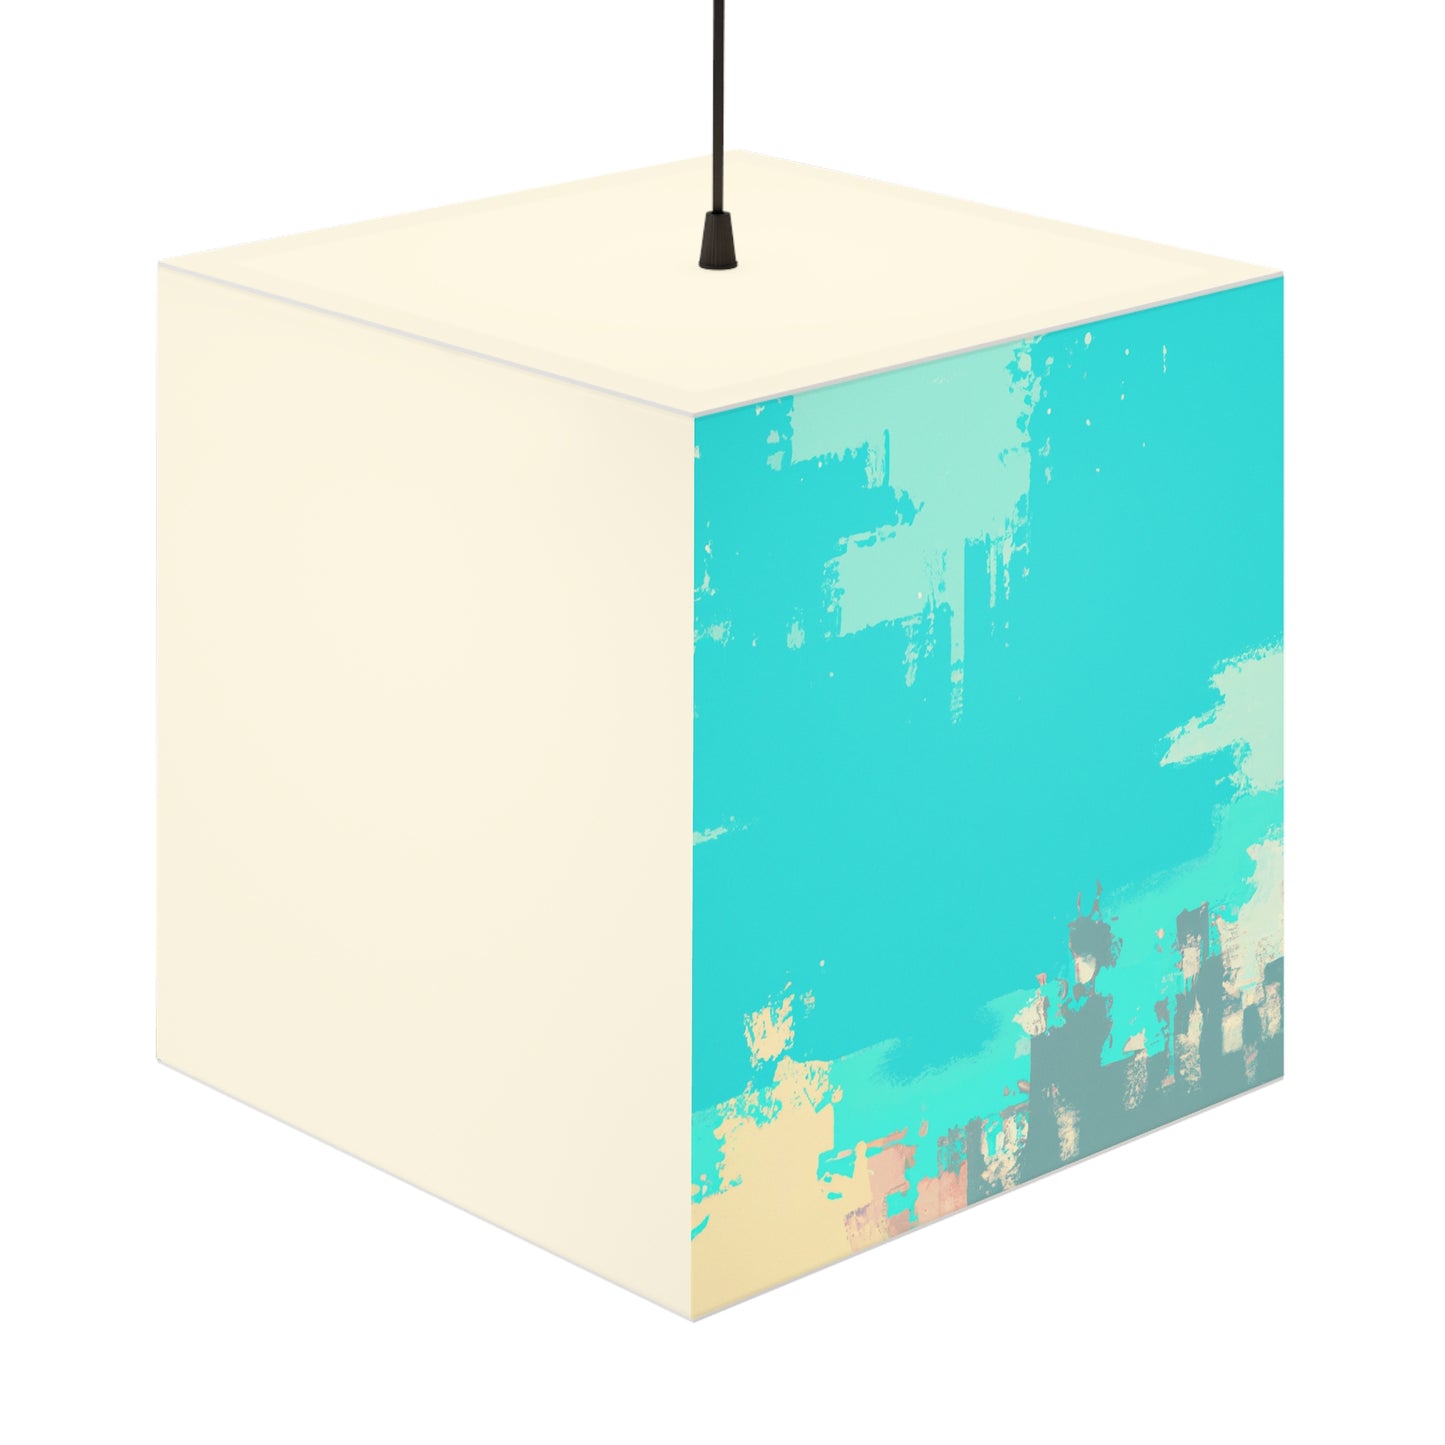 "A Breezy Skyscape: A Combination of Tradition and Modernity" - The Alien Light Cube Lamp